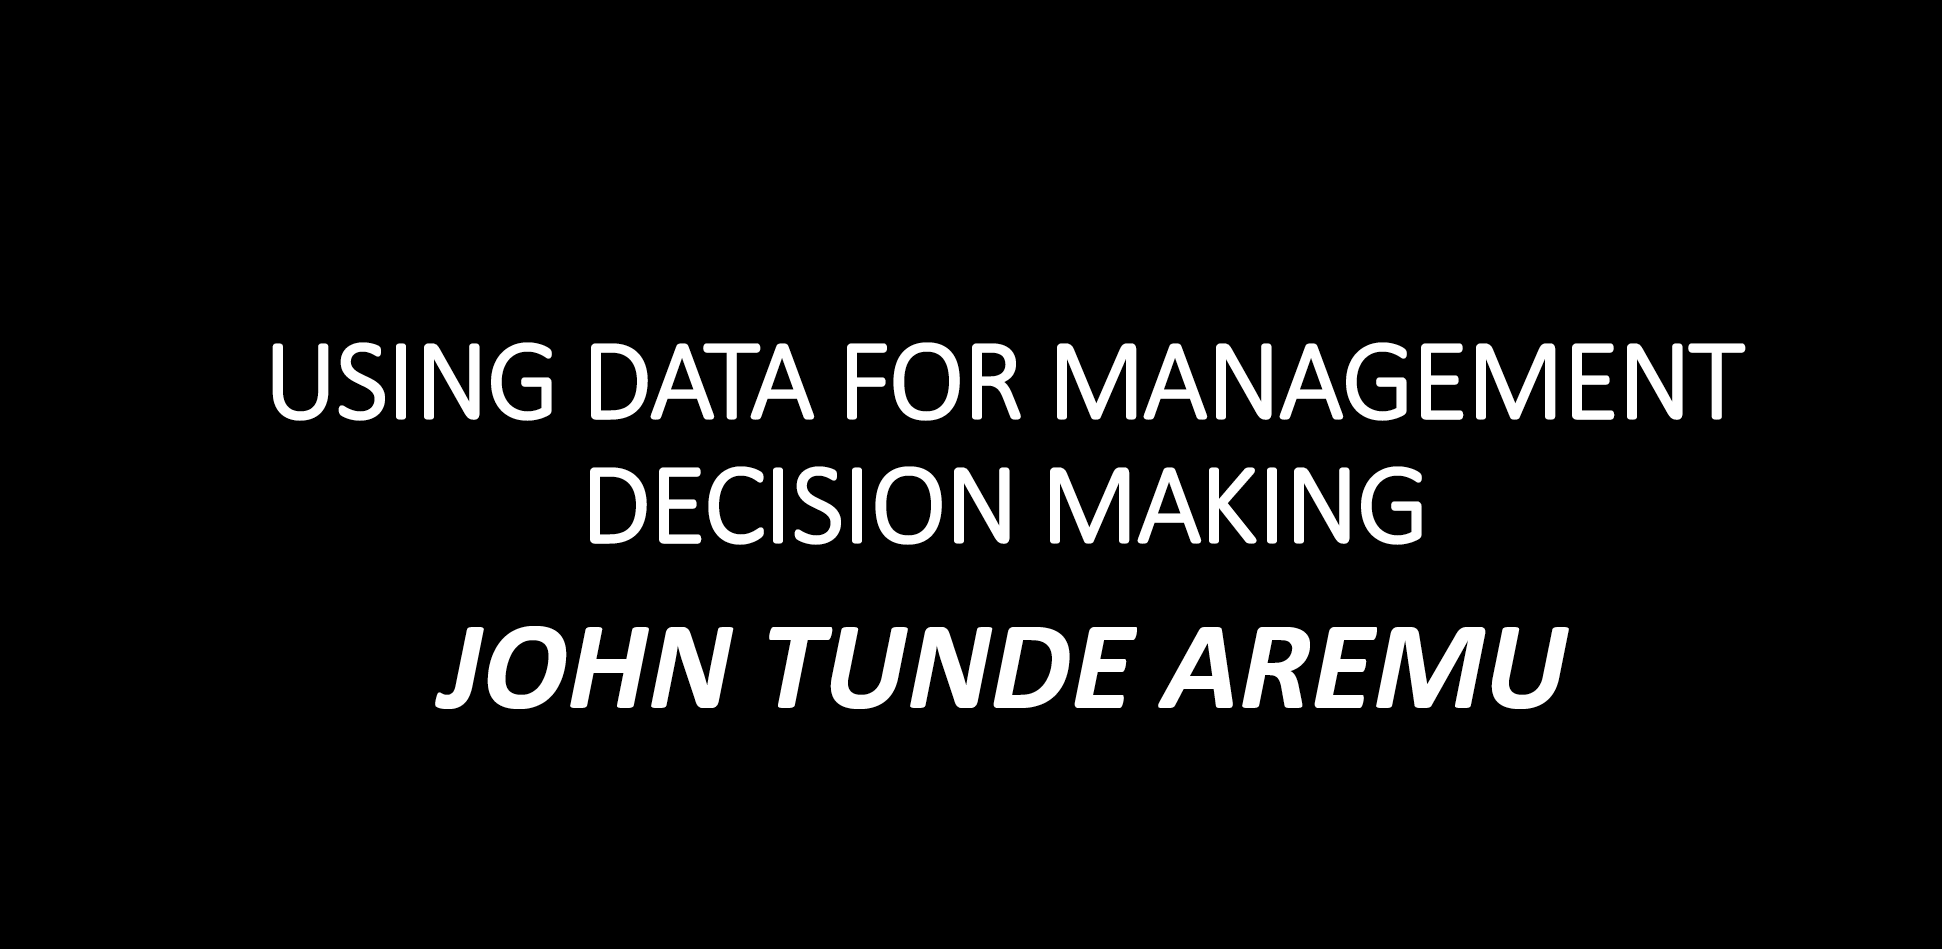 Using data in management decision making